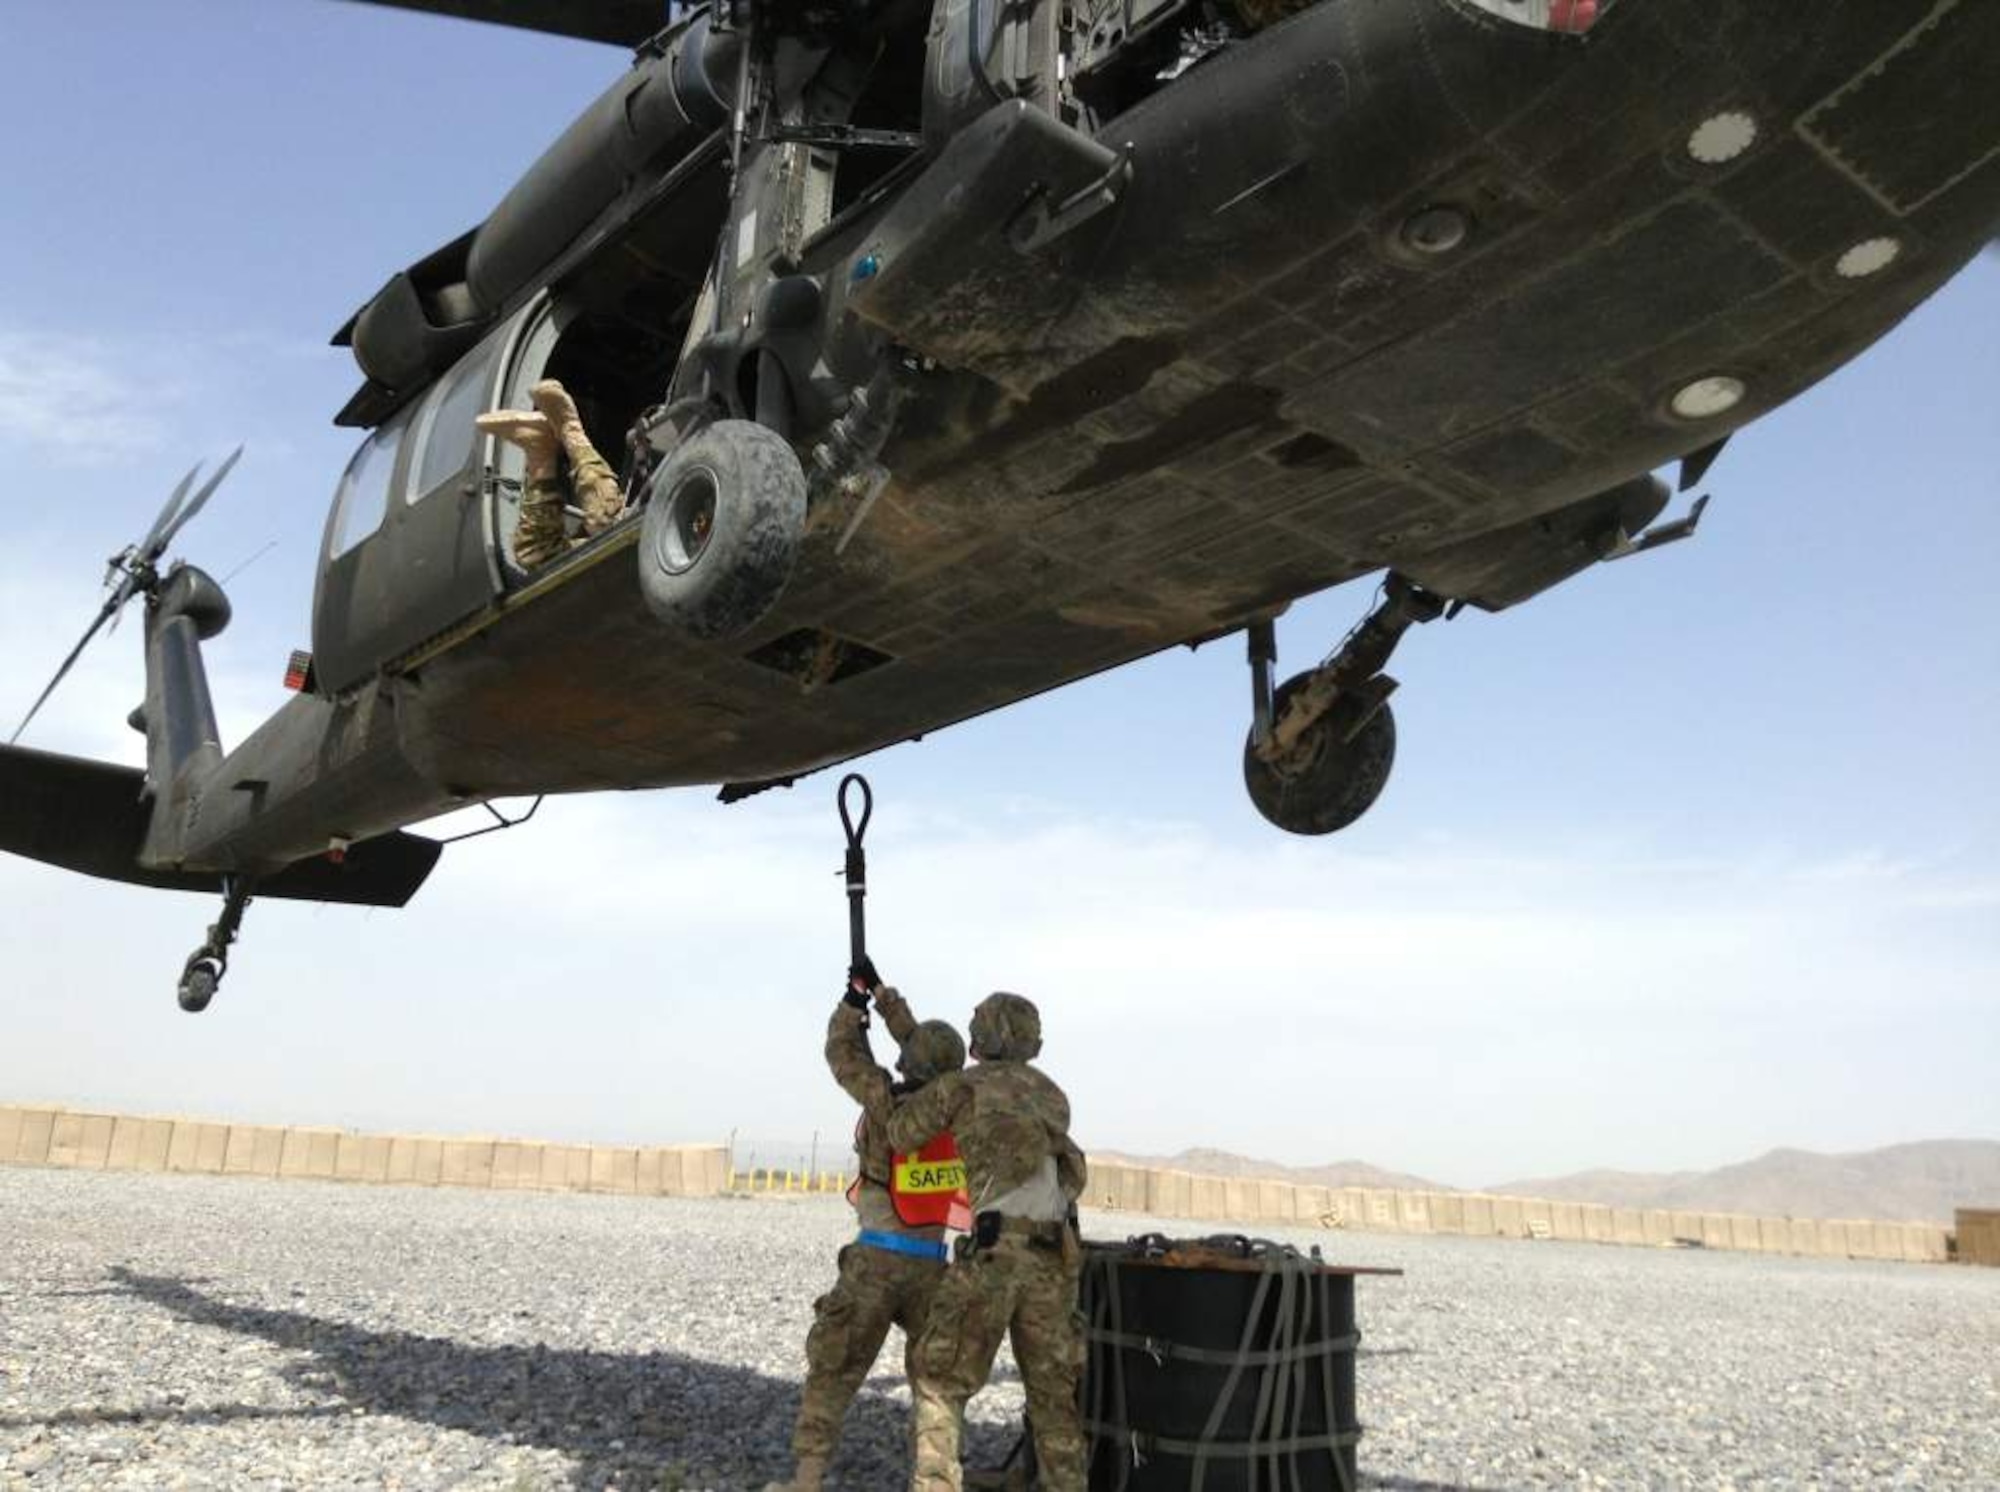 U.S. Air Force Staff Sgt. Shawn Beedham
and U.S. Air Force Senior Airman Joshua Foley, both from the 451st Expeditionary Logistics Readiness Squadron, prepare to hook an 1,800 pound A-22 cargo bag to a UH-60 Black Hawk flown by Soldiers of the 3rd Combat Aviation Brigade during a coalition-joint slingload mission at Kandahar Airfield, Afghanistan. (Courtesy photo)
